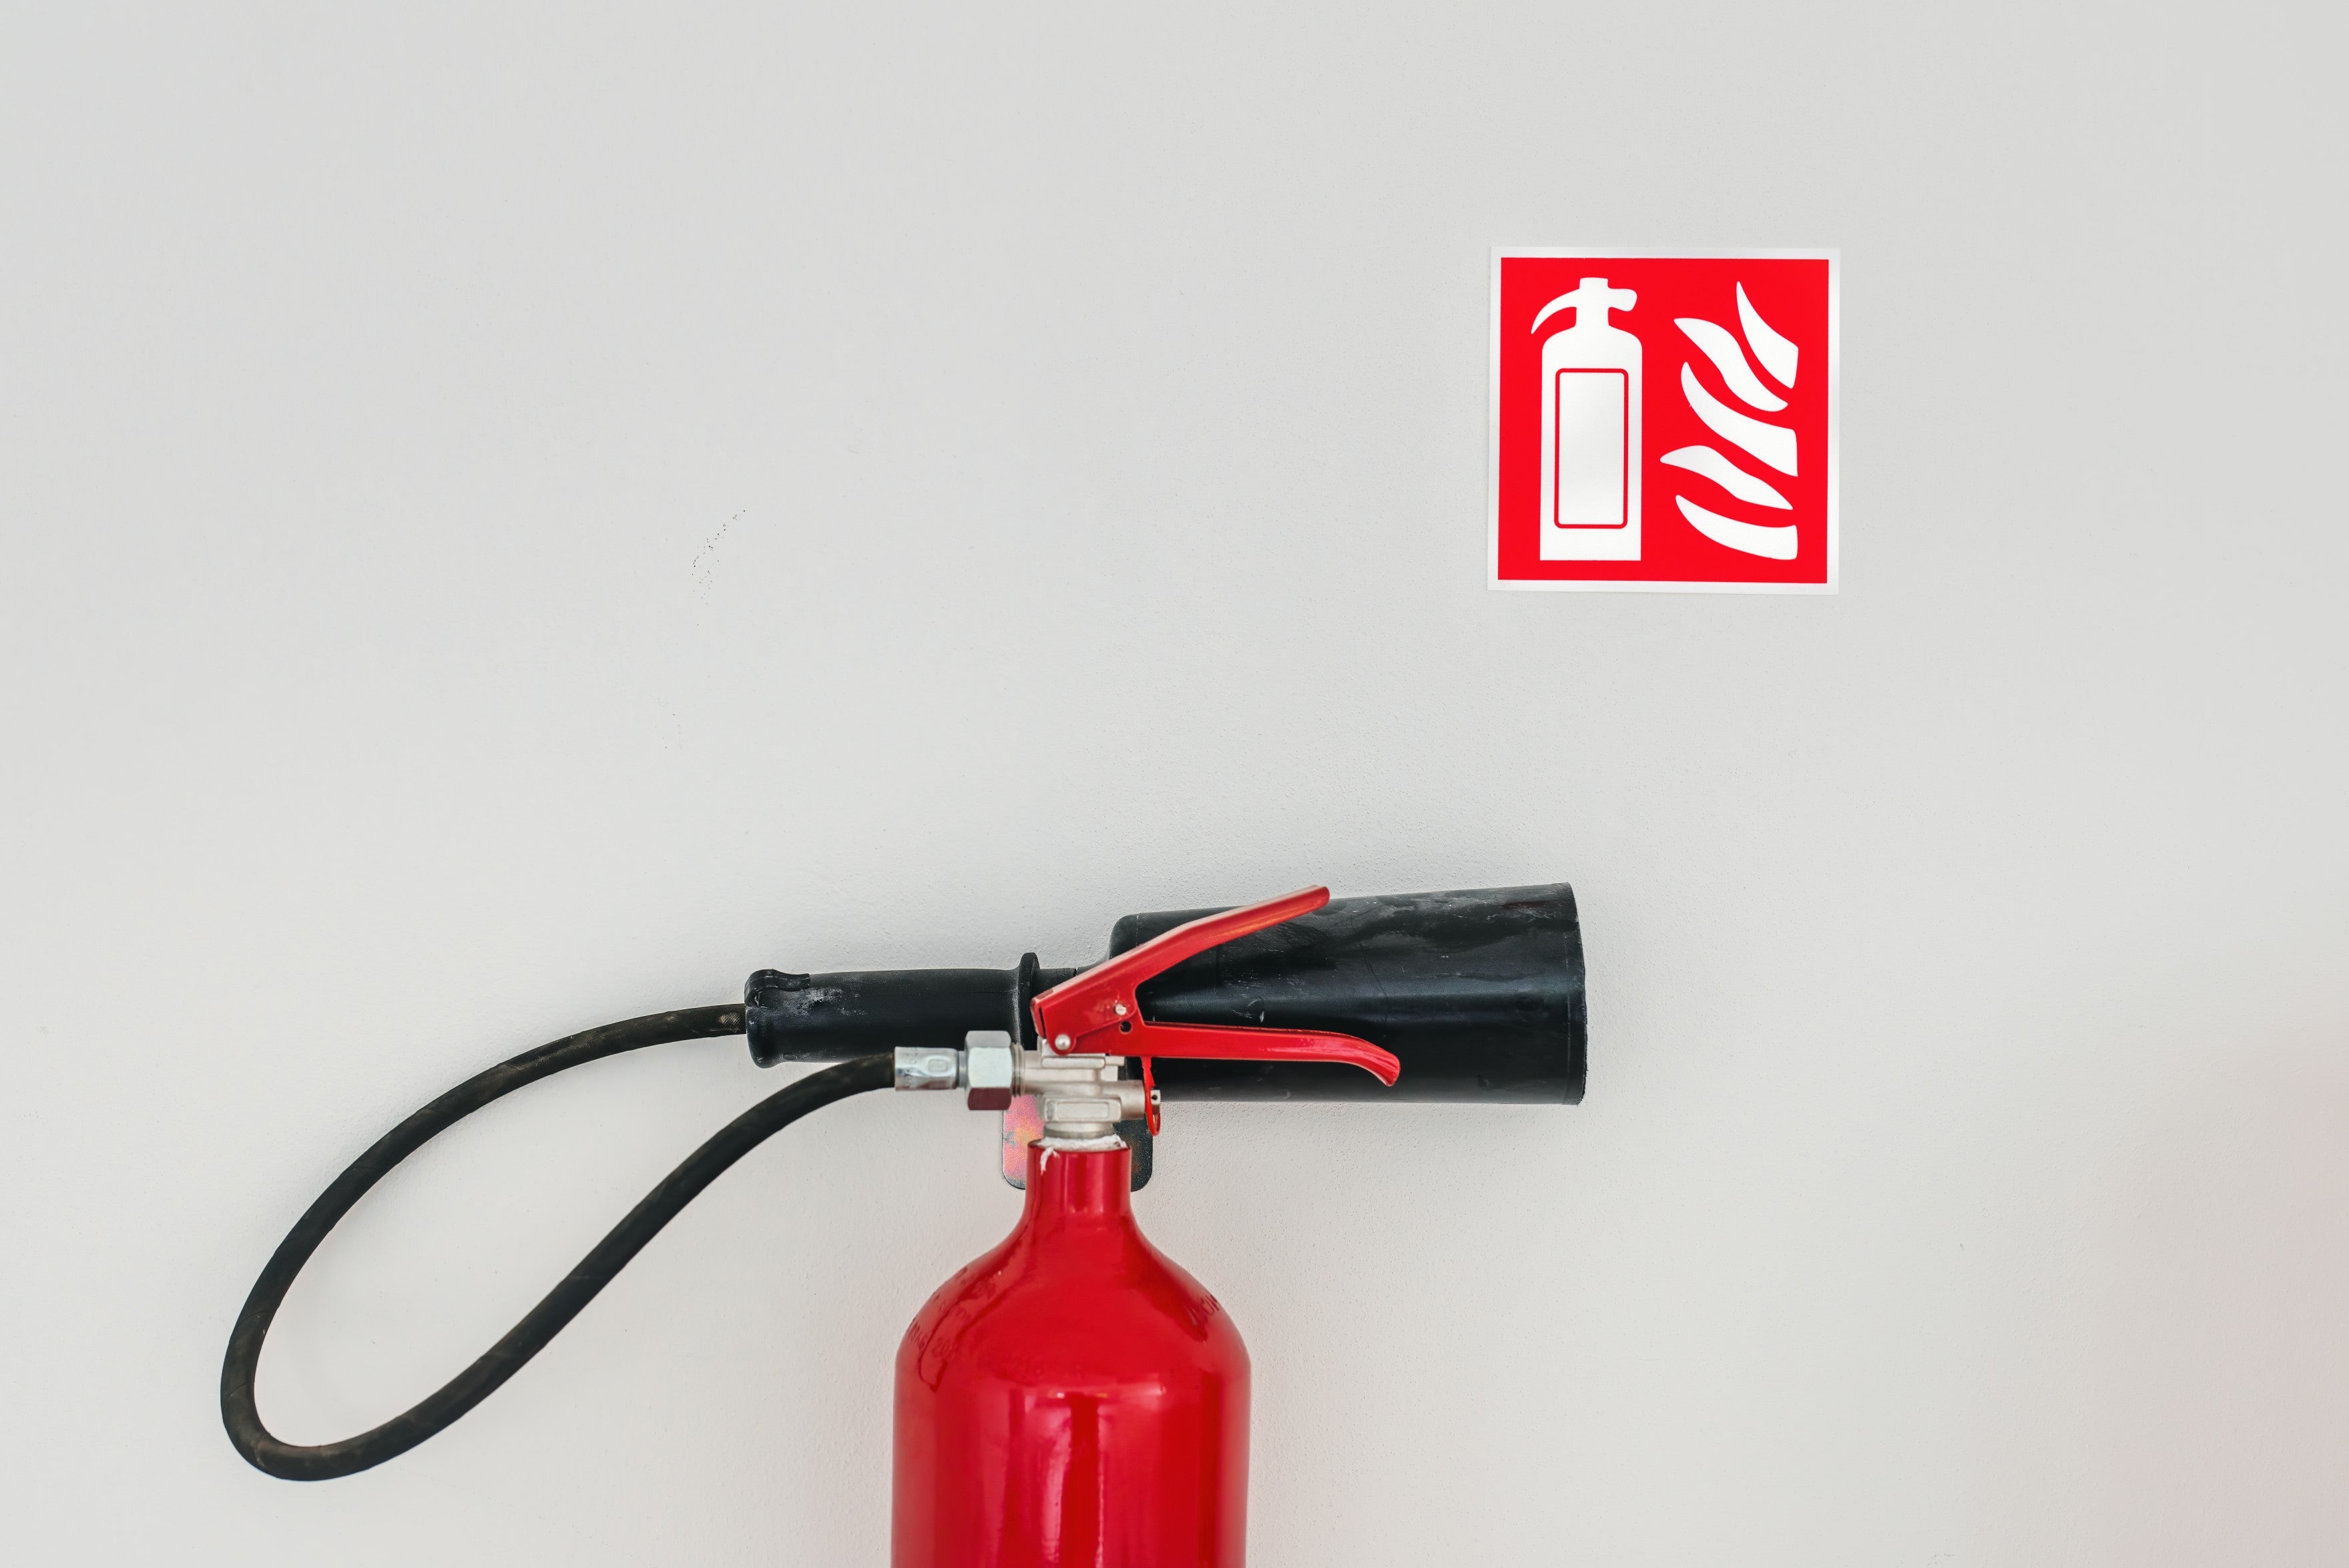 Fire Blanket vs. Fire Extinguisher: What's the Best Pick for You?